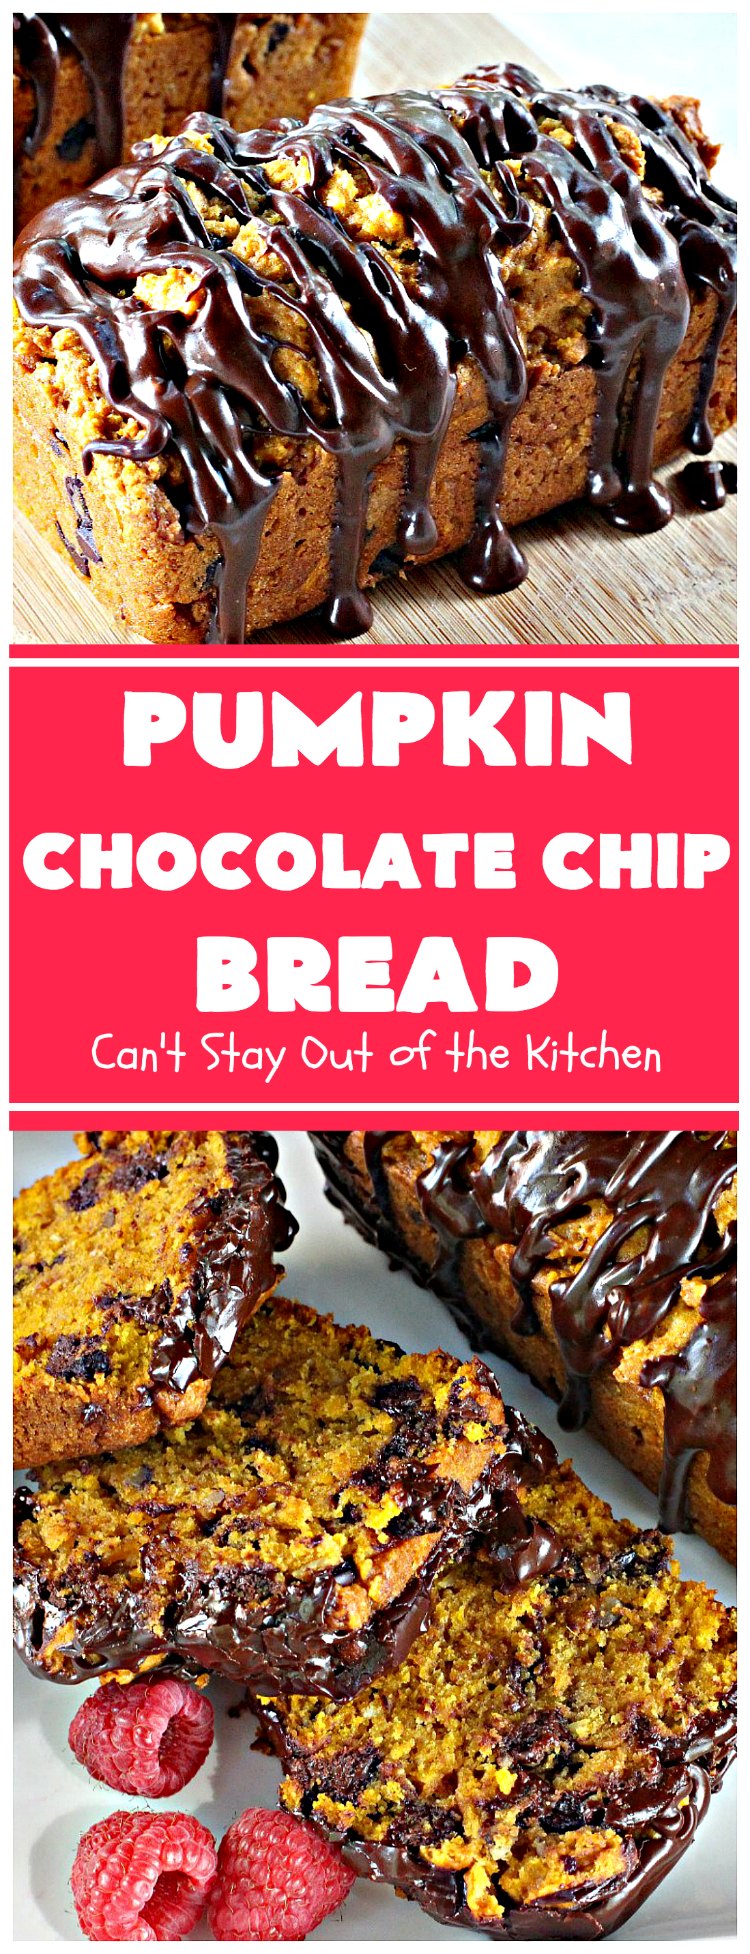 Pumpkin Chocolate Chip Bread | Can't Stay Out of the Kitchen